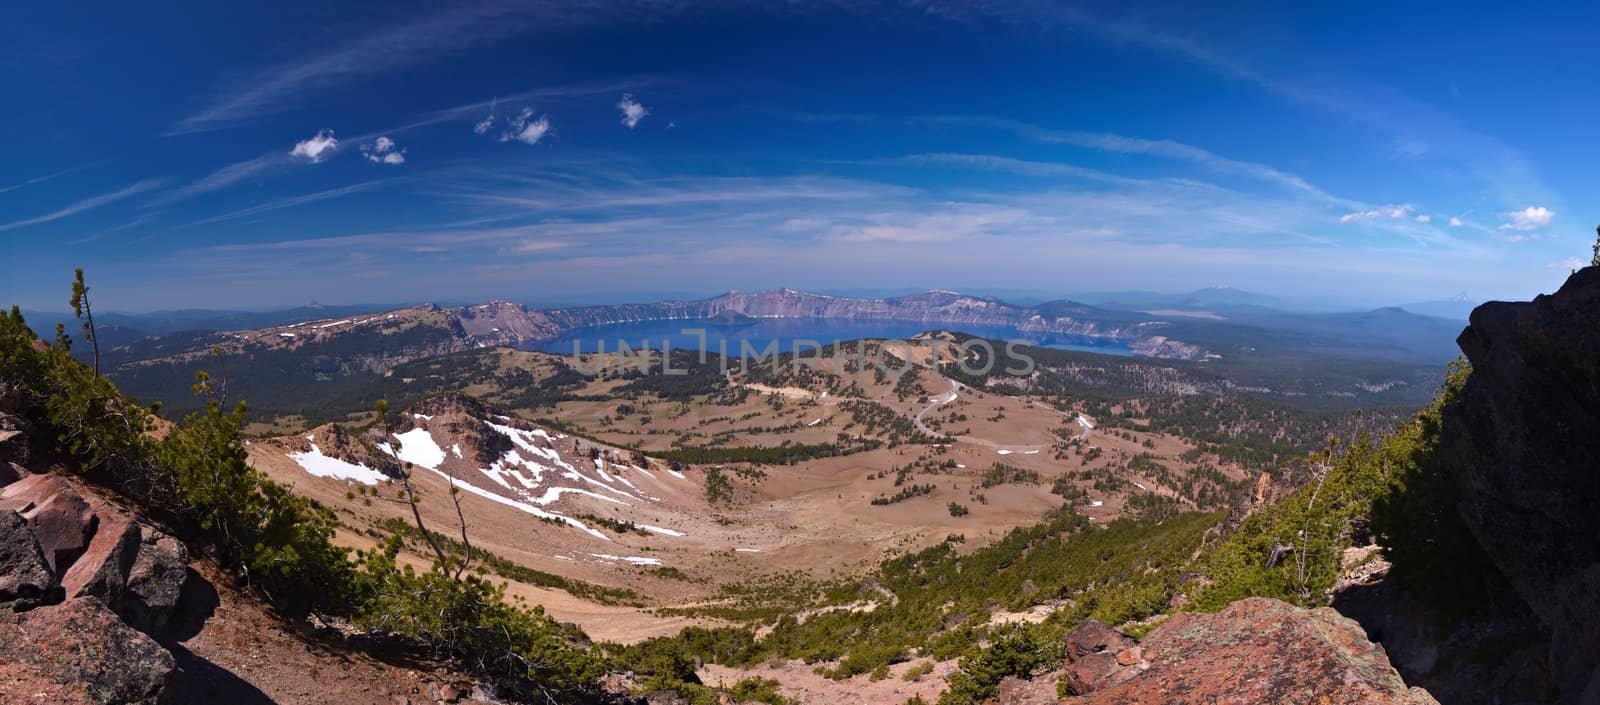 44 megapixel panorama of Crater Lake by LoonChild